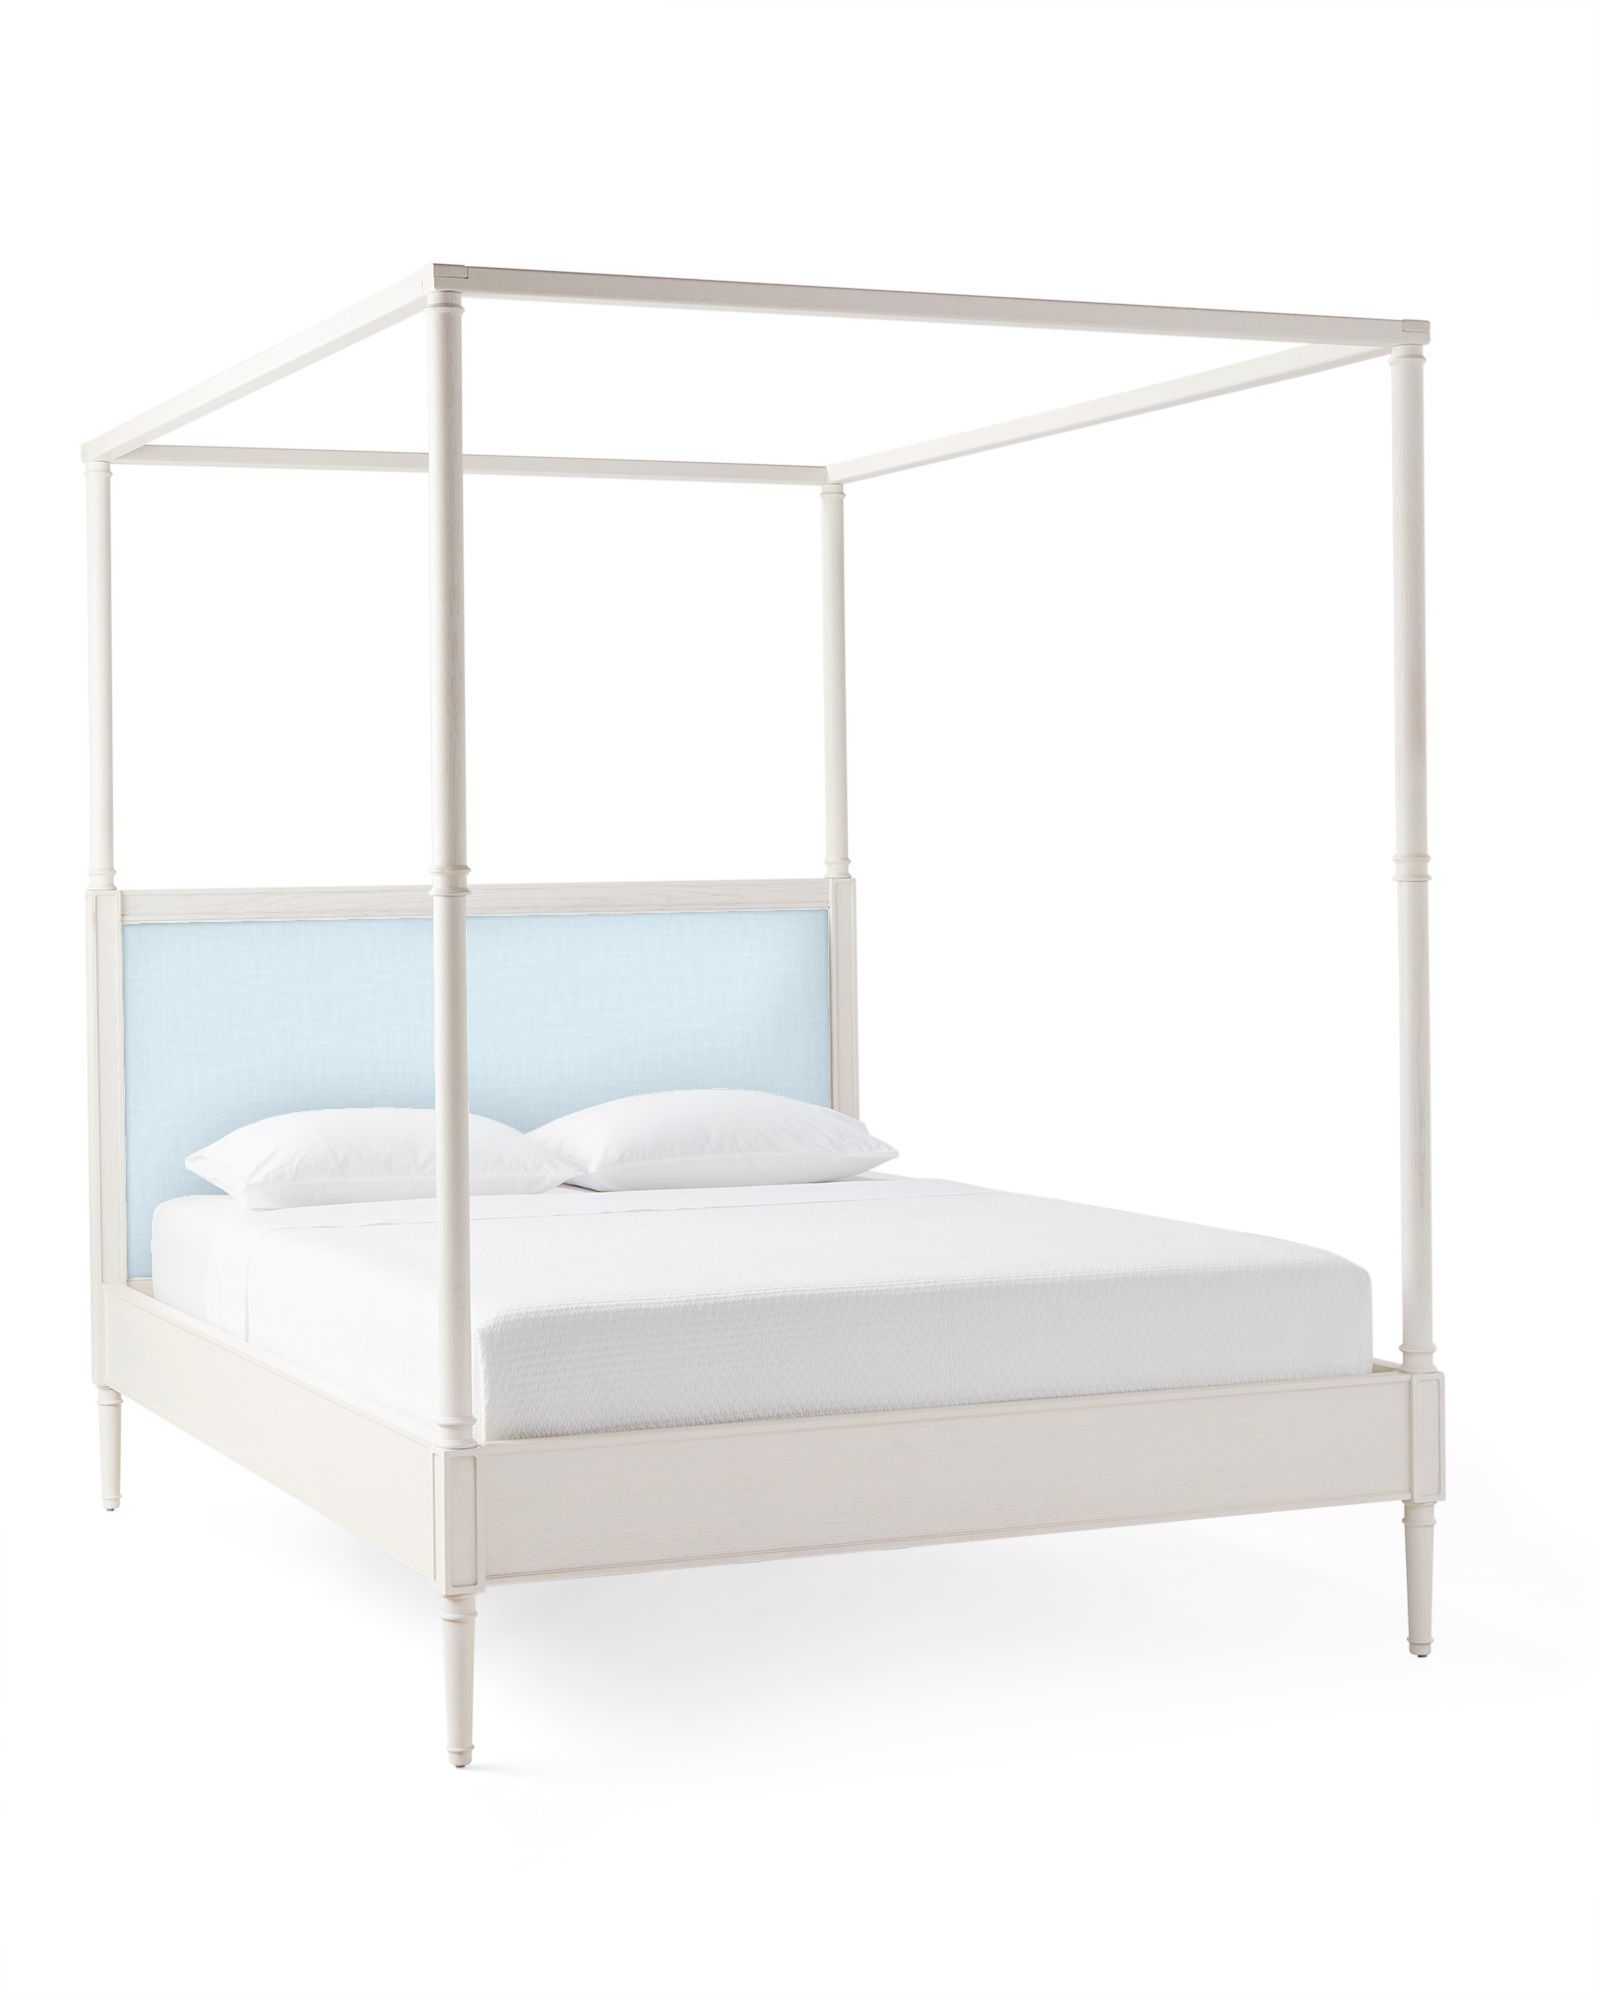 Bridgeway Four Poster Bed - Washed White | Serena and Lily